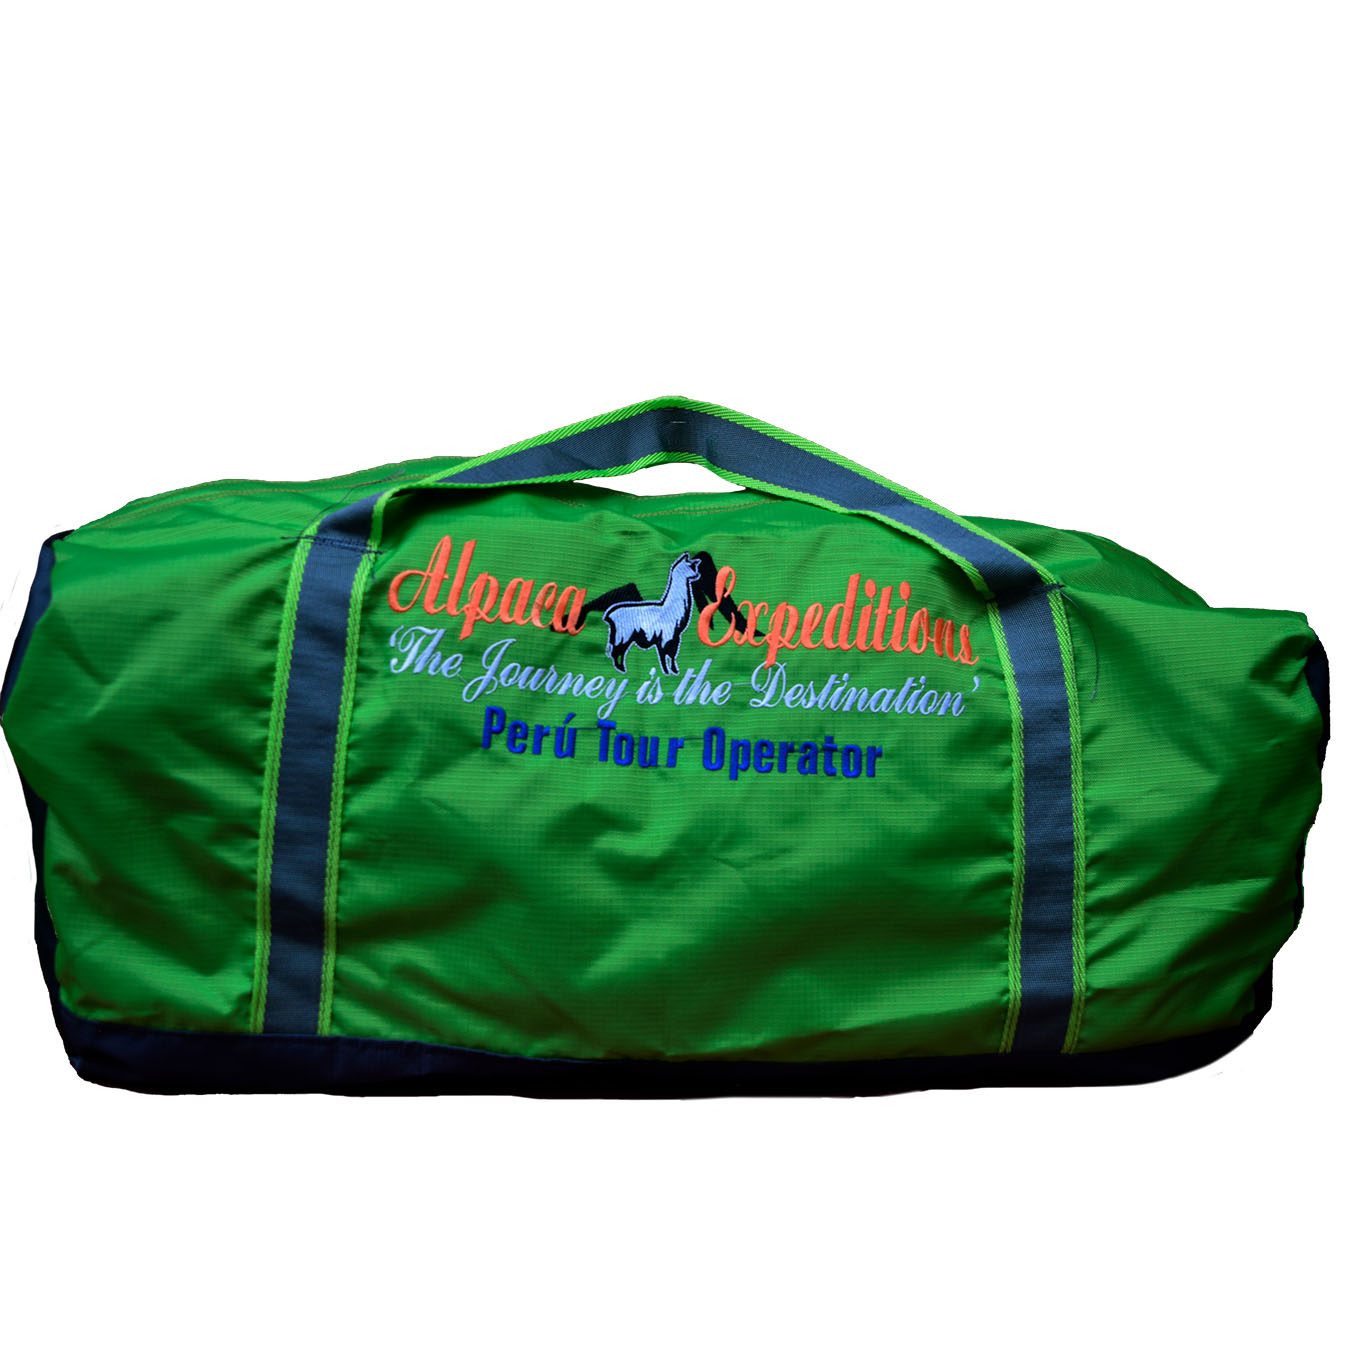 DUFFLE BAGS , BACKCOVERS, PONCHOS, & PERSONAL PORTER